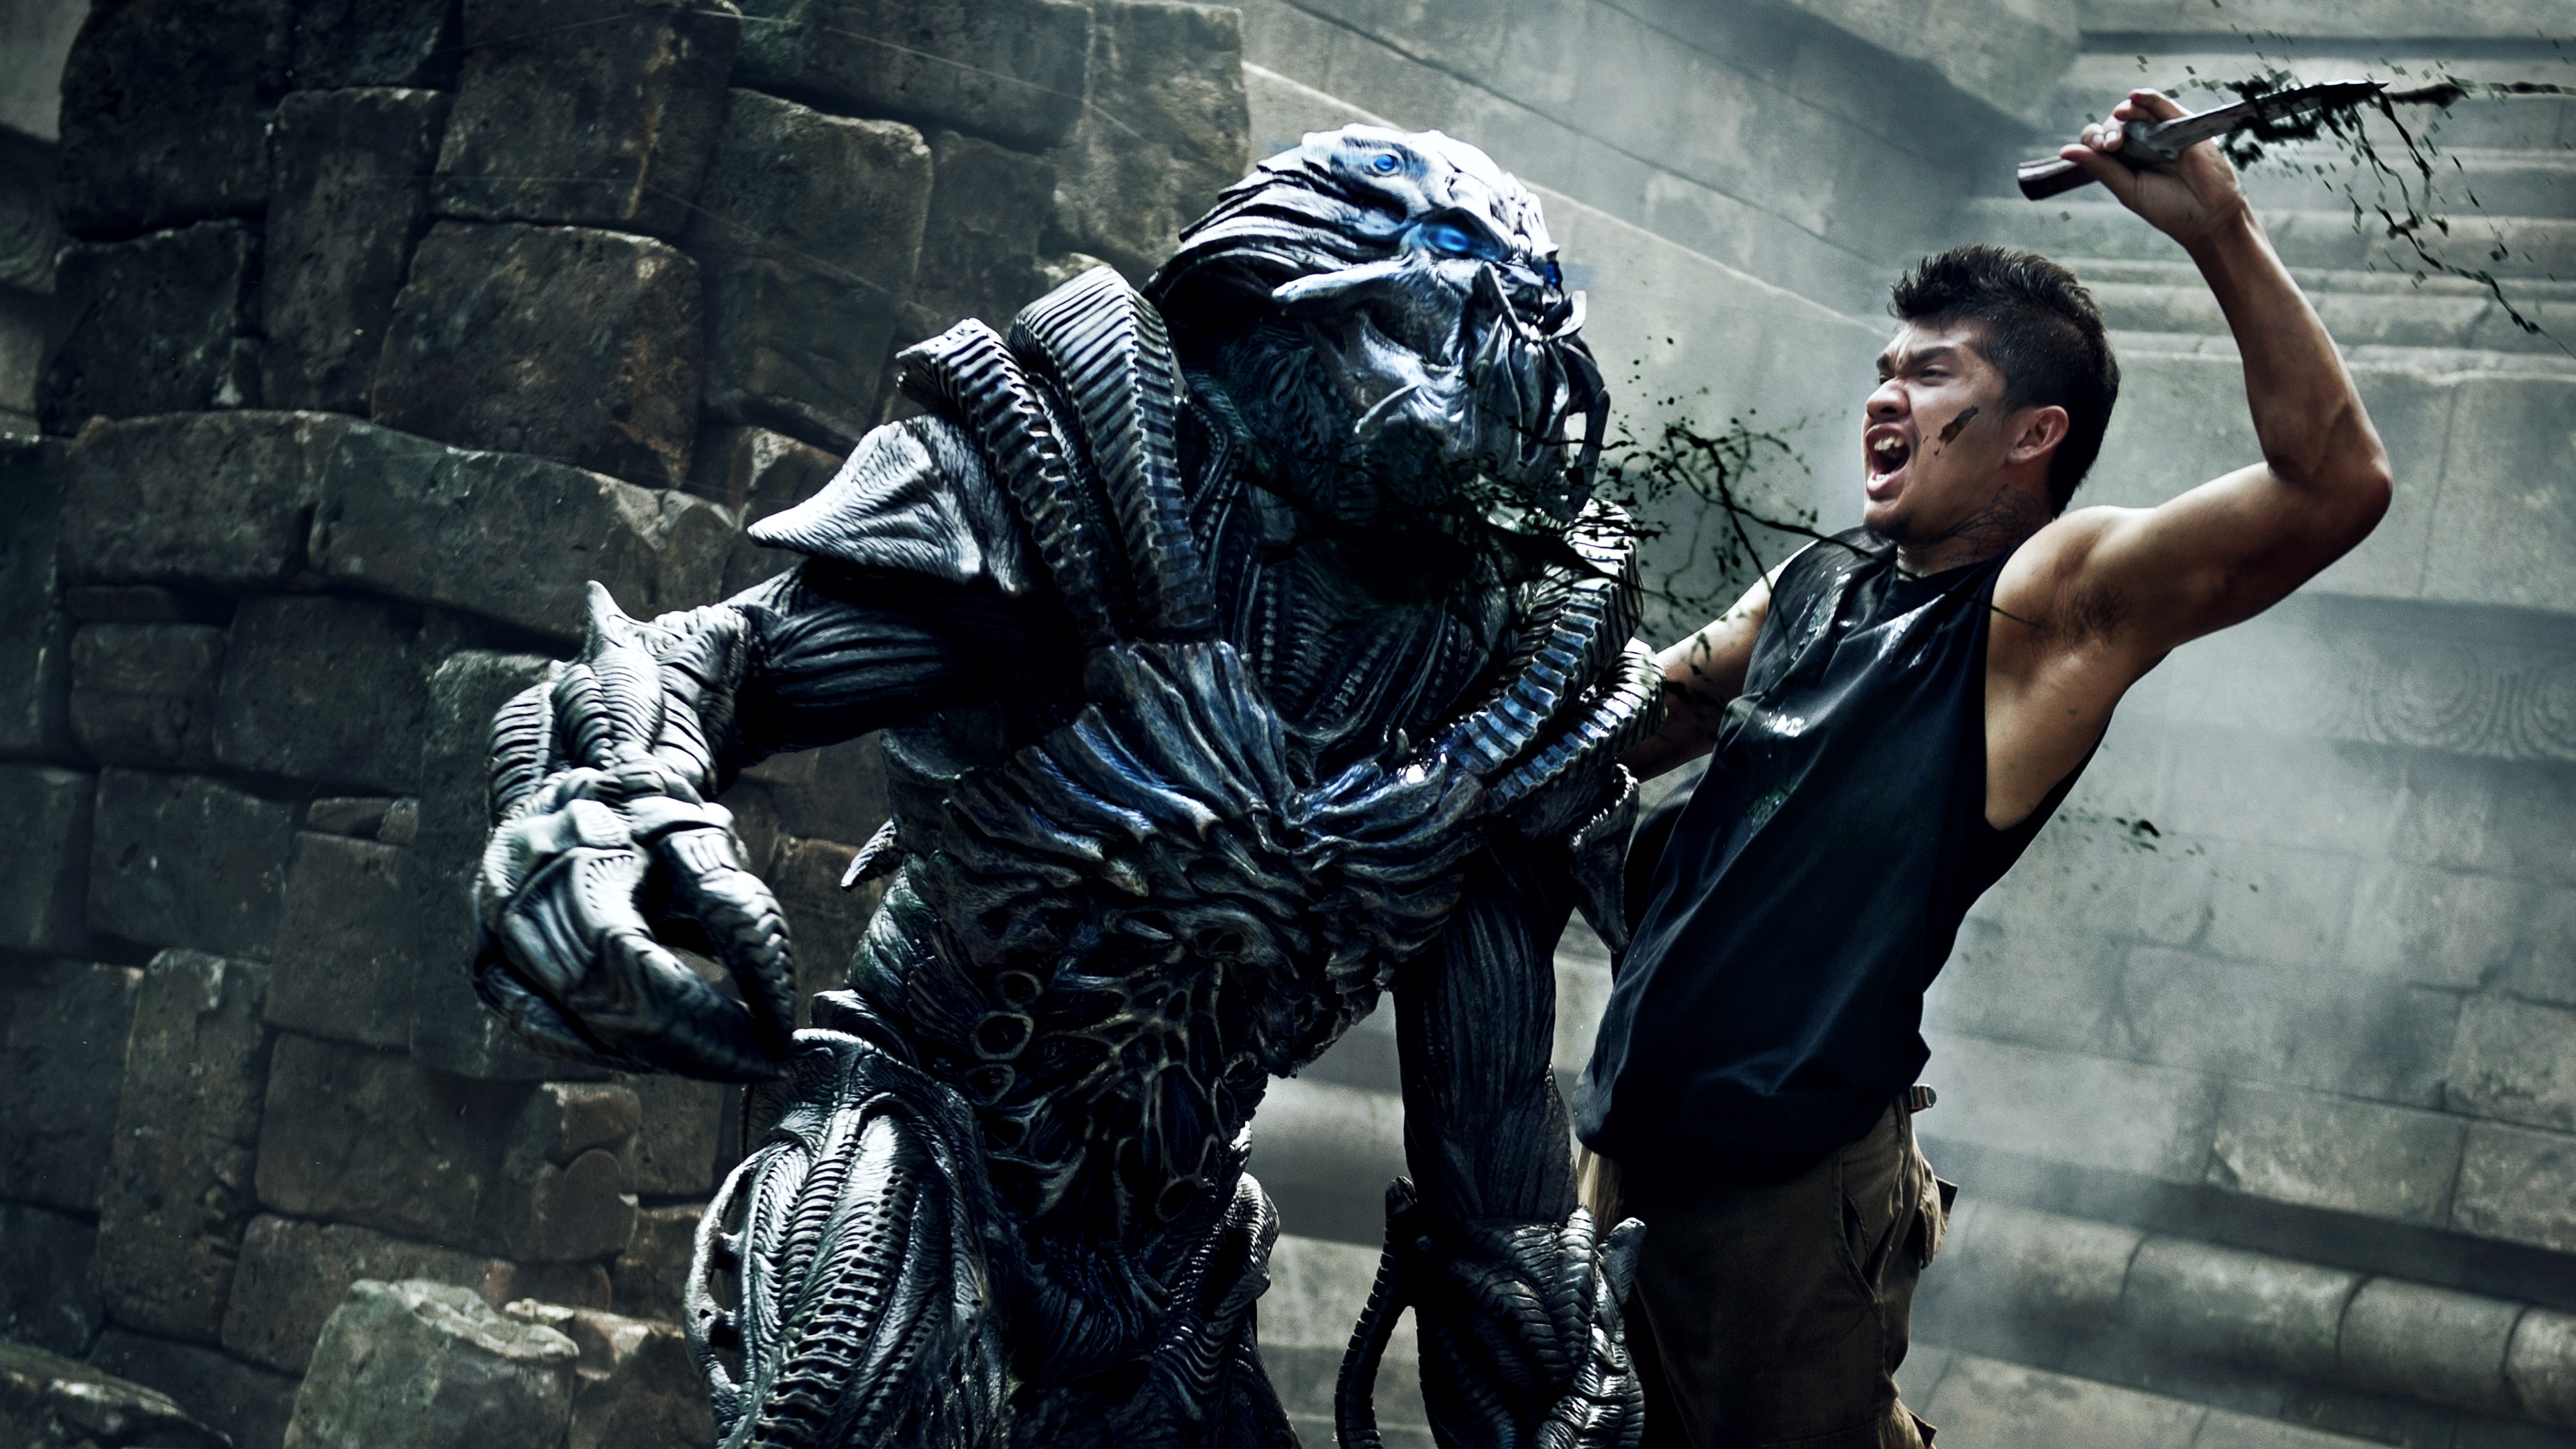 Iko Uwais In Beyond Skyline Courtesy Of Vertical Entertainment